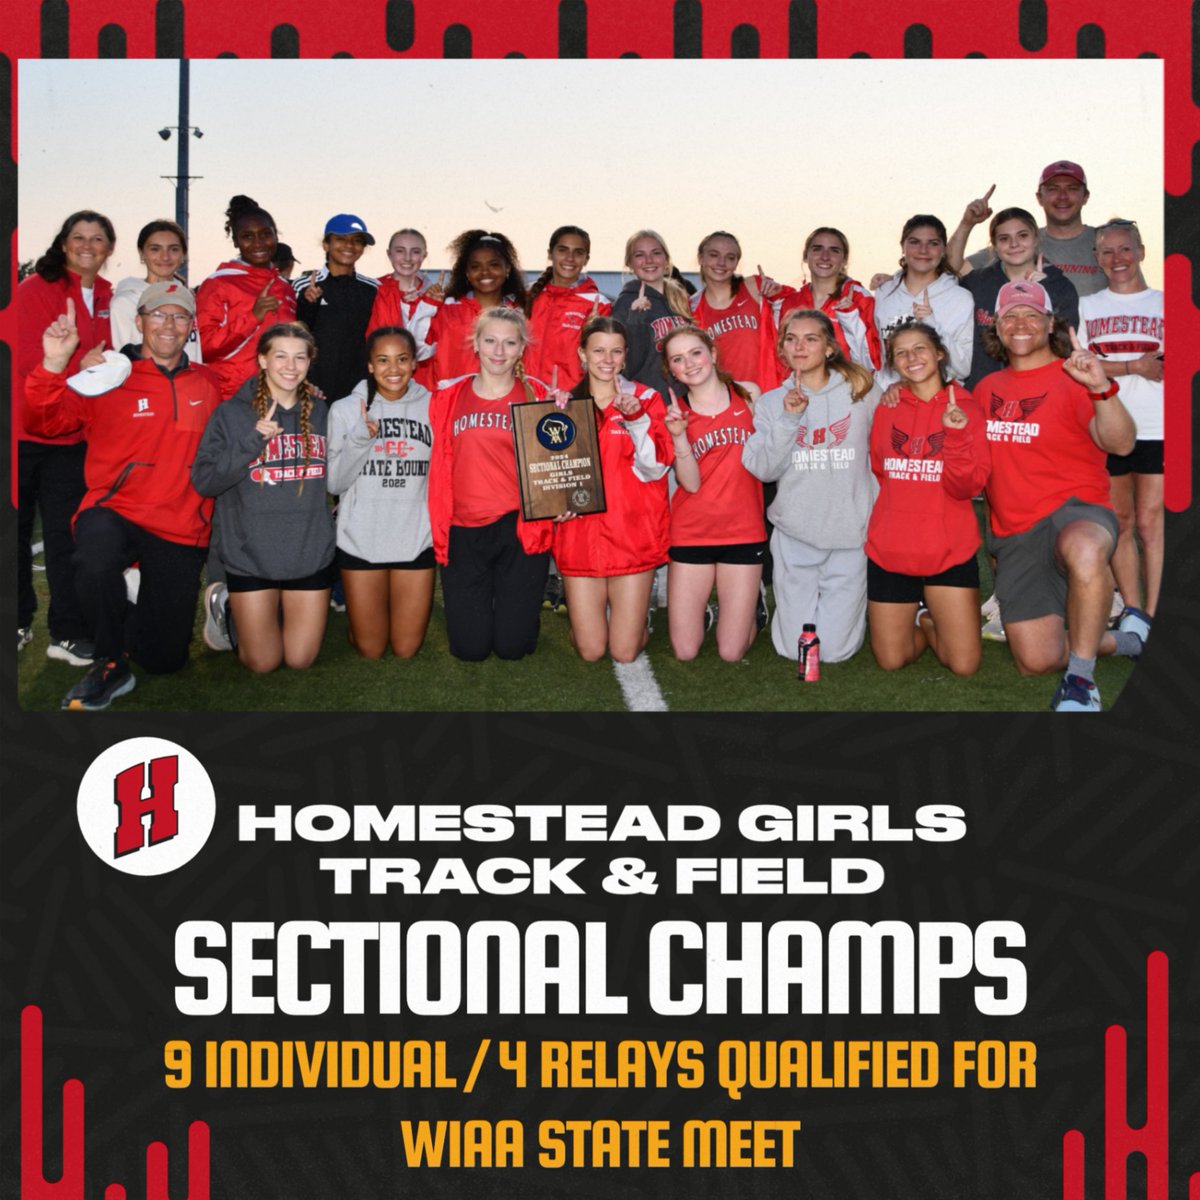 Congrats to the HHS Girls Track & Field team on a Sectional Championship and an unprecedented 13 events qualifying for state! 17 girls travelled to West Bend and all 17 will be representing Homestead in LaCrosse next weekend. So impressed and grateful for this team and coaches!